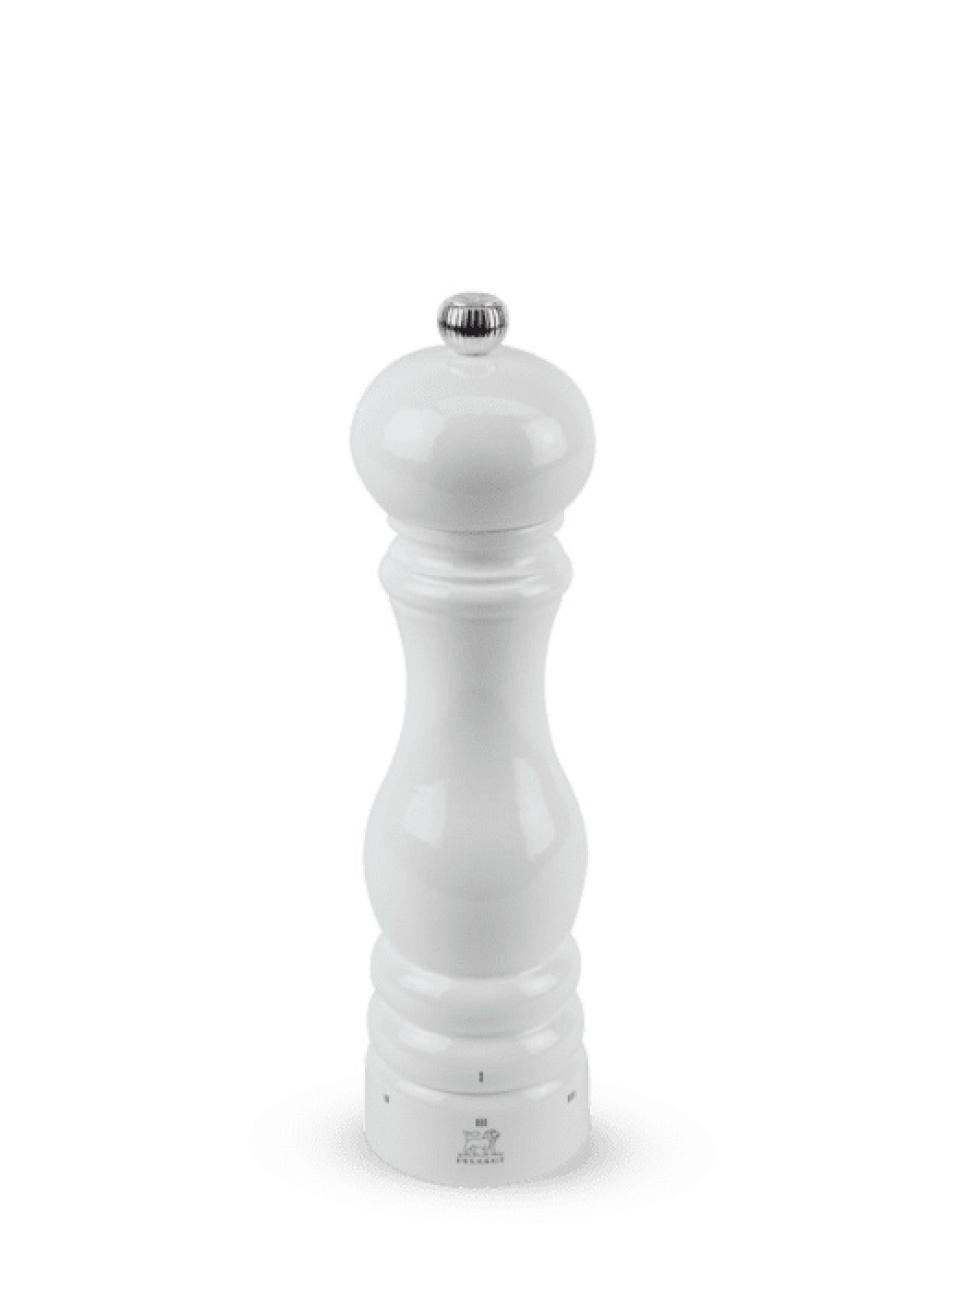 Paris Pepper mill 22 cm, U Select, White - Peugeot in the group Cooking / Kitchen utensils / Salt & pepper mills at KitchenLab (1090-13455)